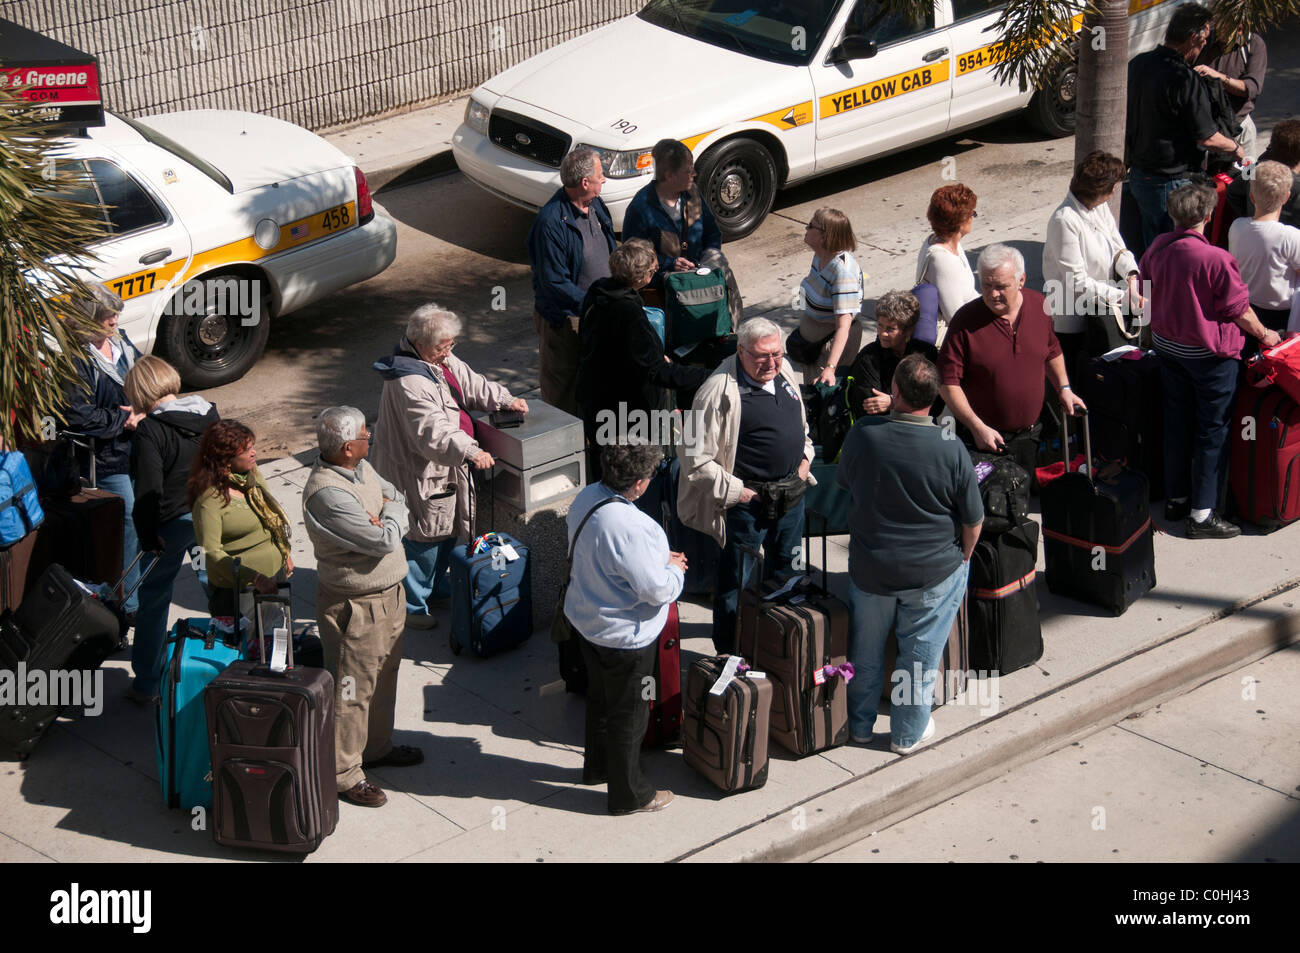 Arrived passengers waiting for ground transportation. Stock Photo